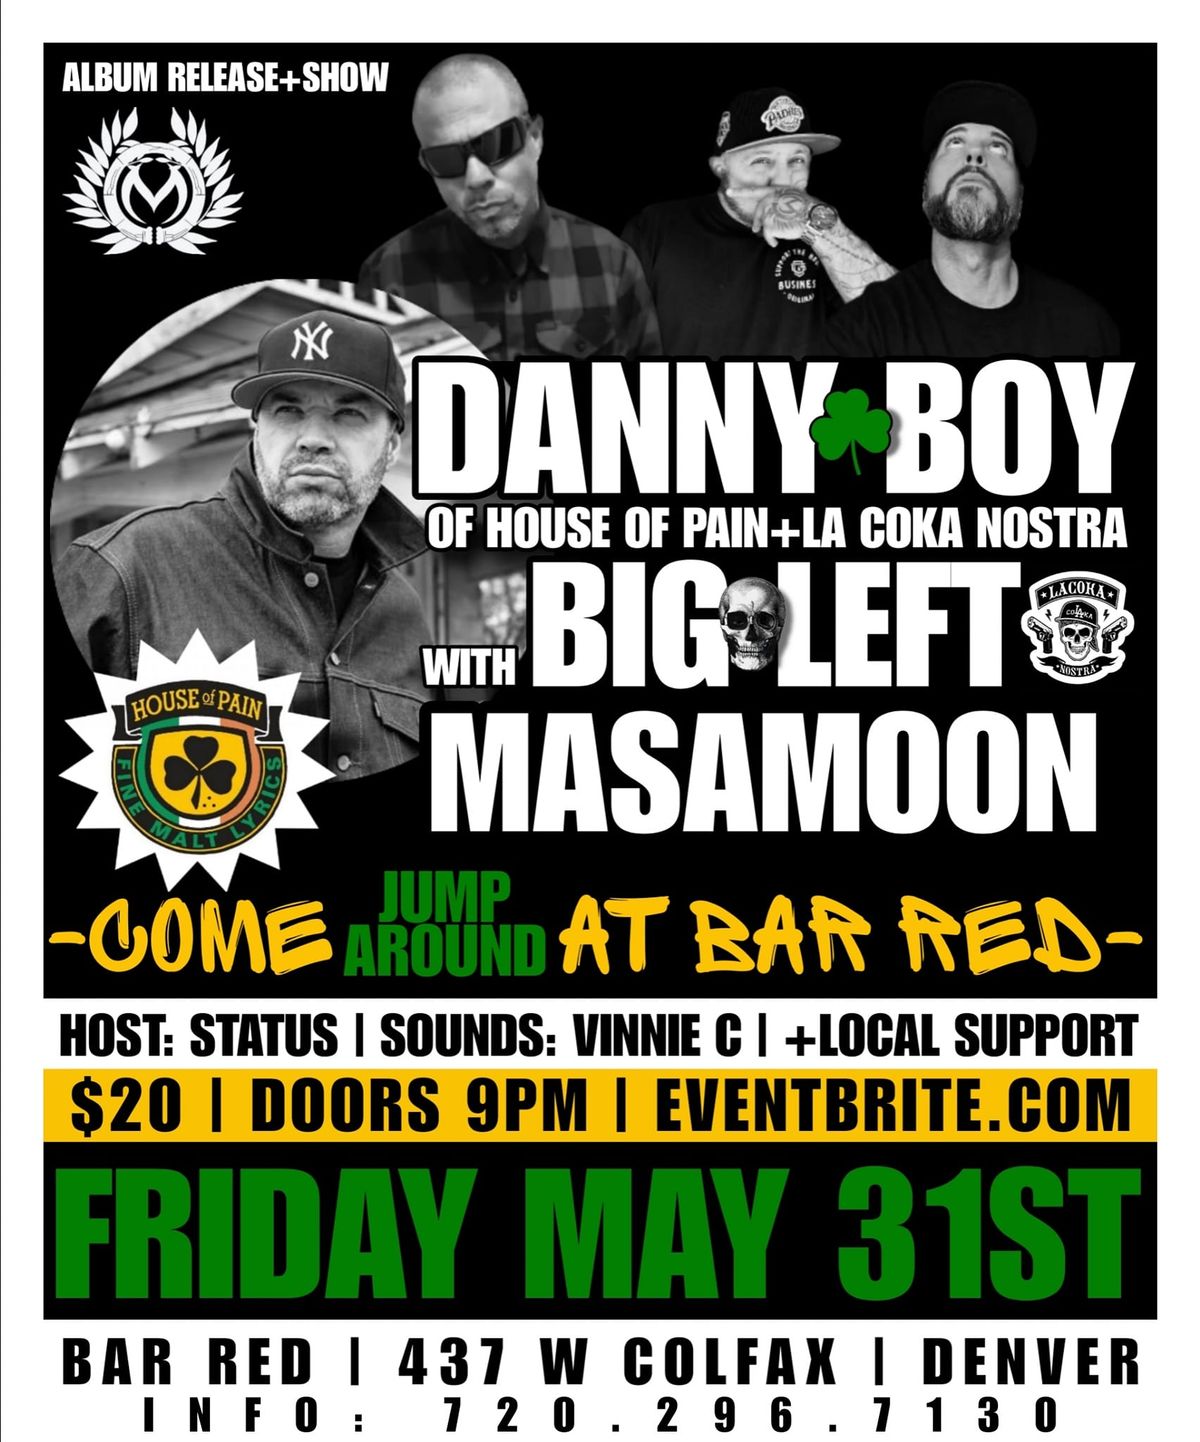 DANNY BOY + BIG LEFT + MASAMOON "SHOW" AT BAR RED W\/ LOCAL SUPPORT 